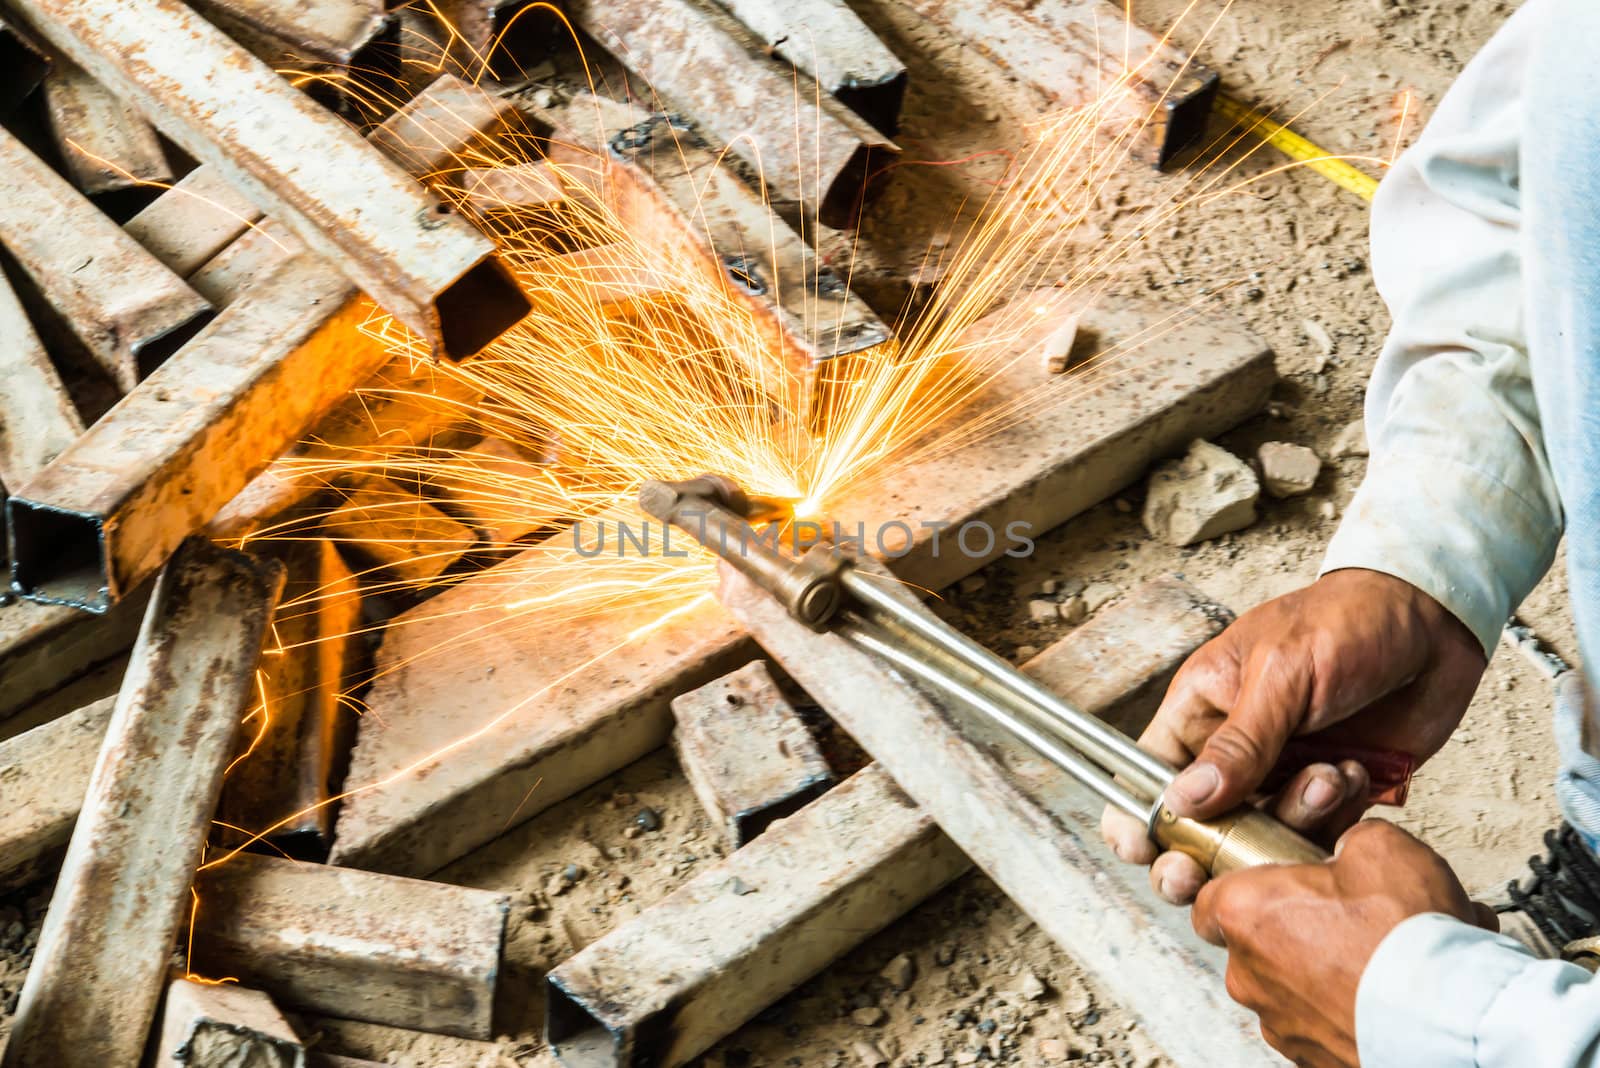 metal cutting with acetylene torch, focus on tools, low Light